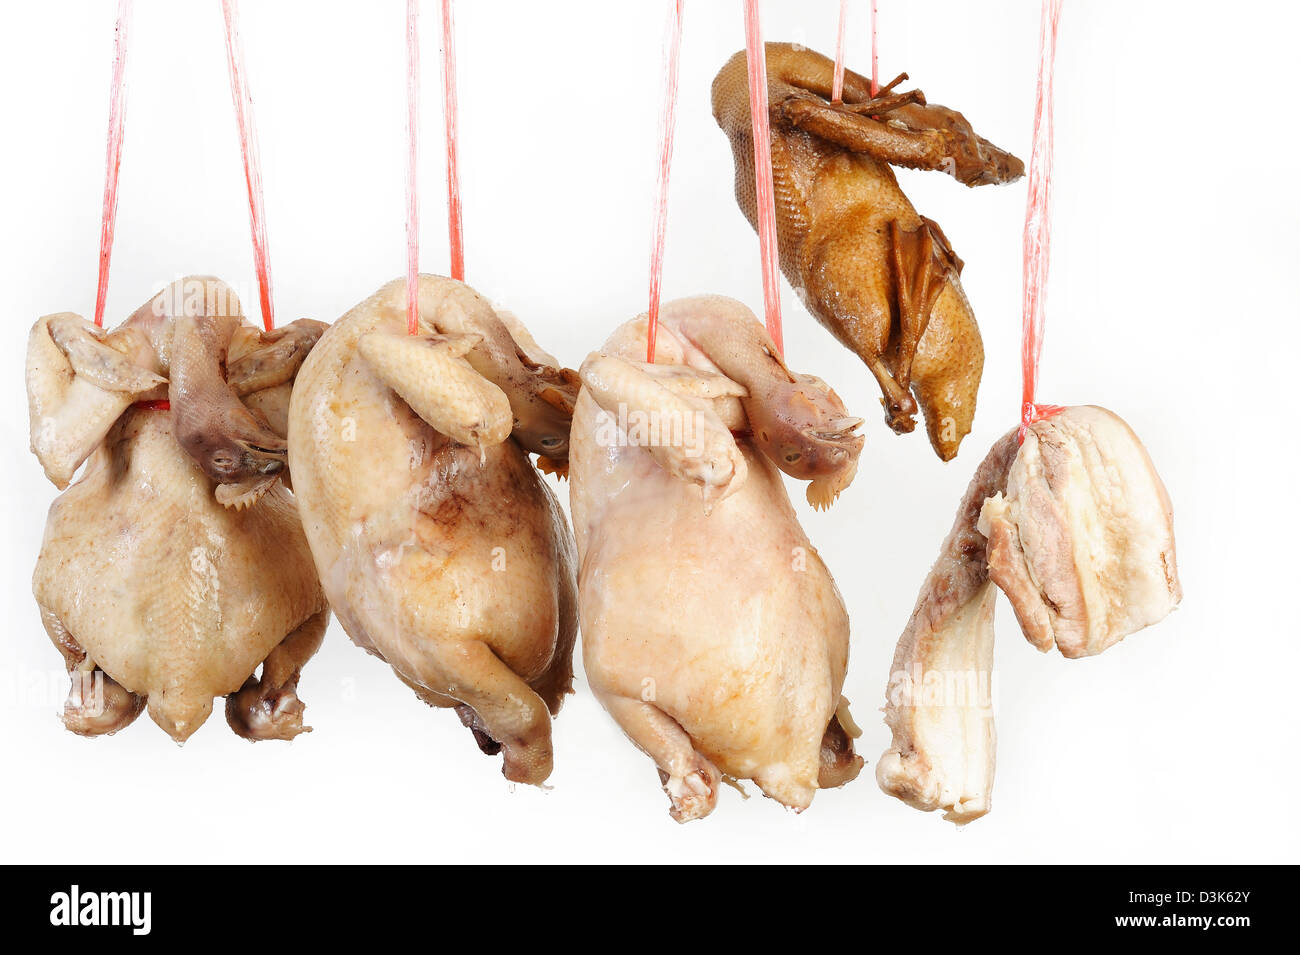 chicken duck and streaky pork for cooking Stock Photo